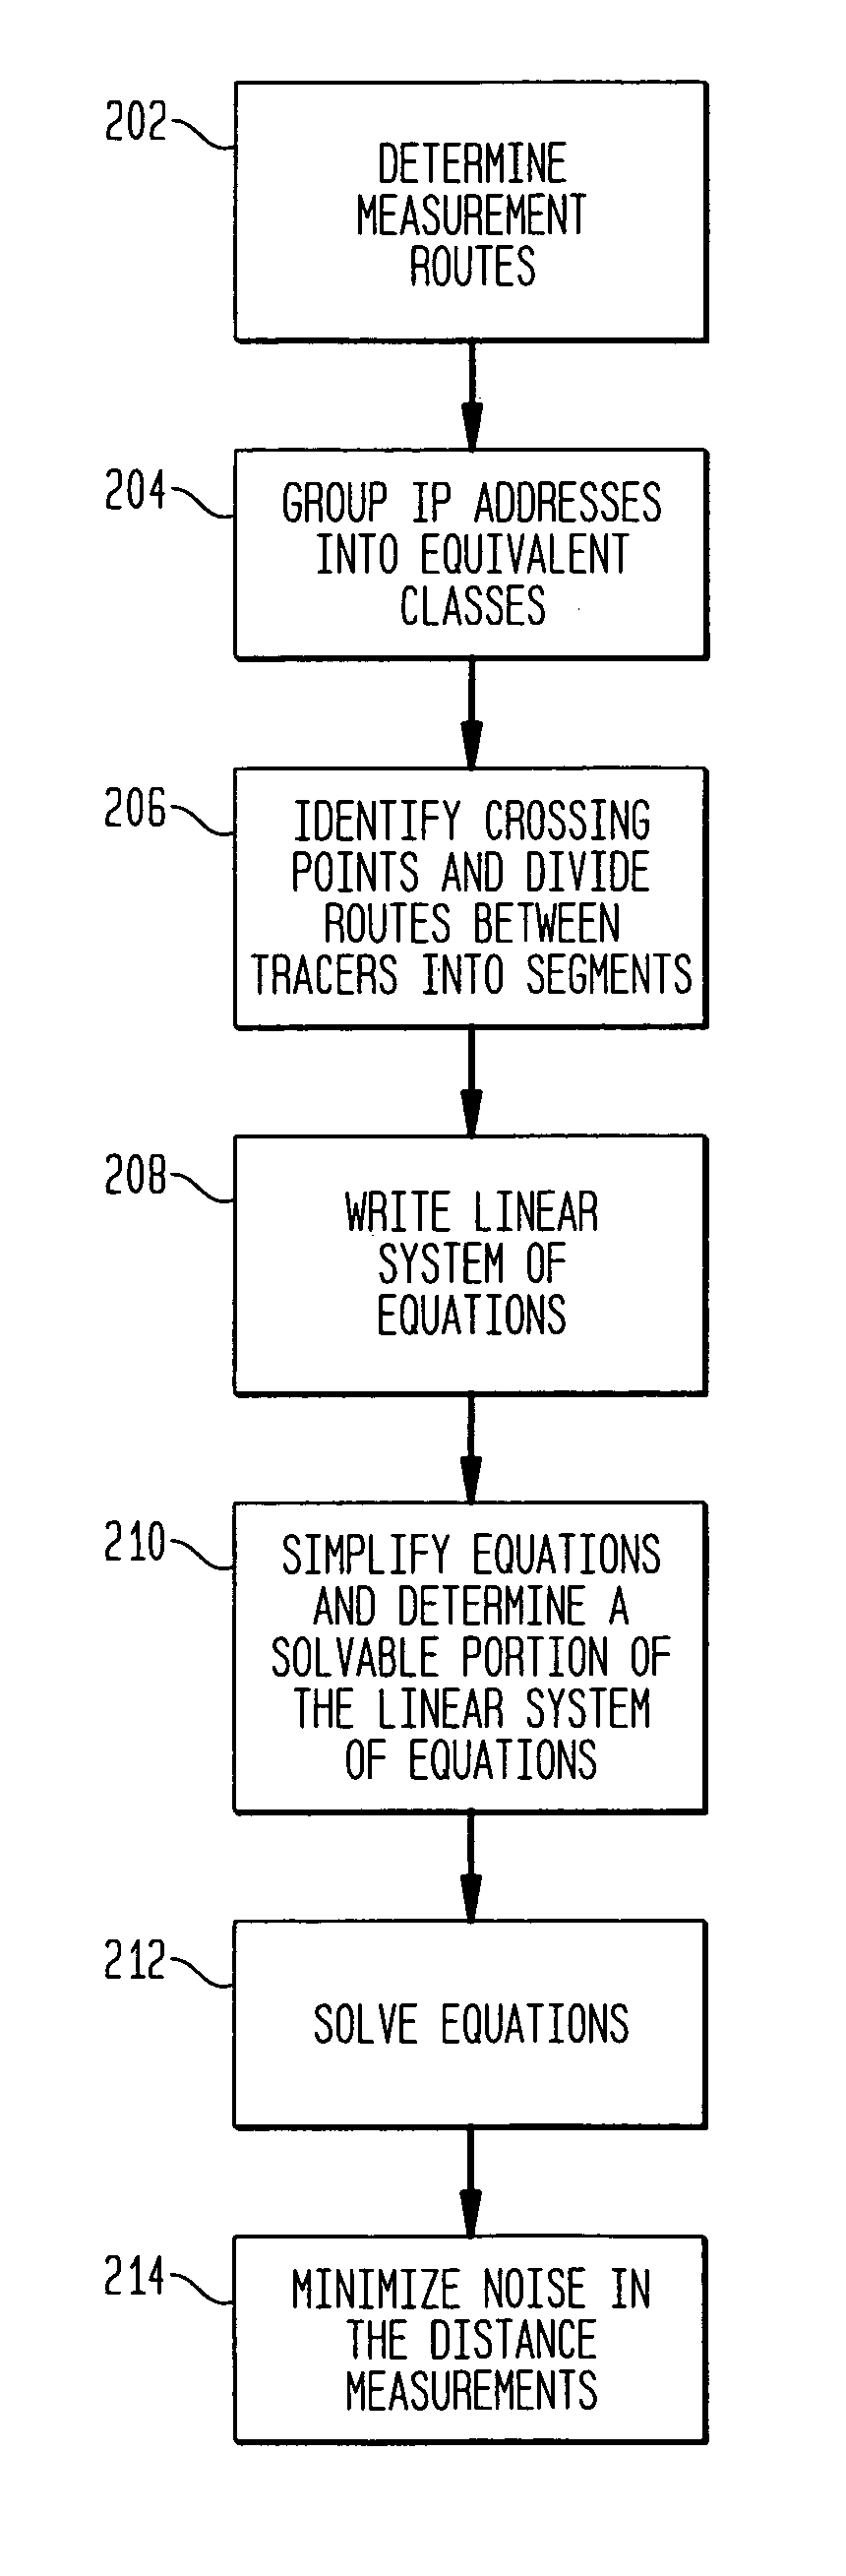 Method and apparatus for network mapping using end-to-end delay measurements